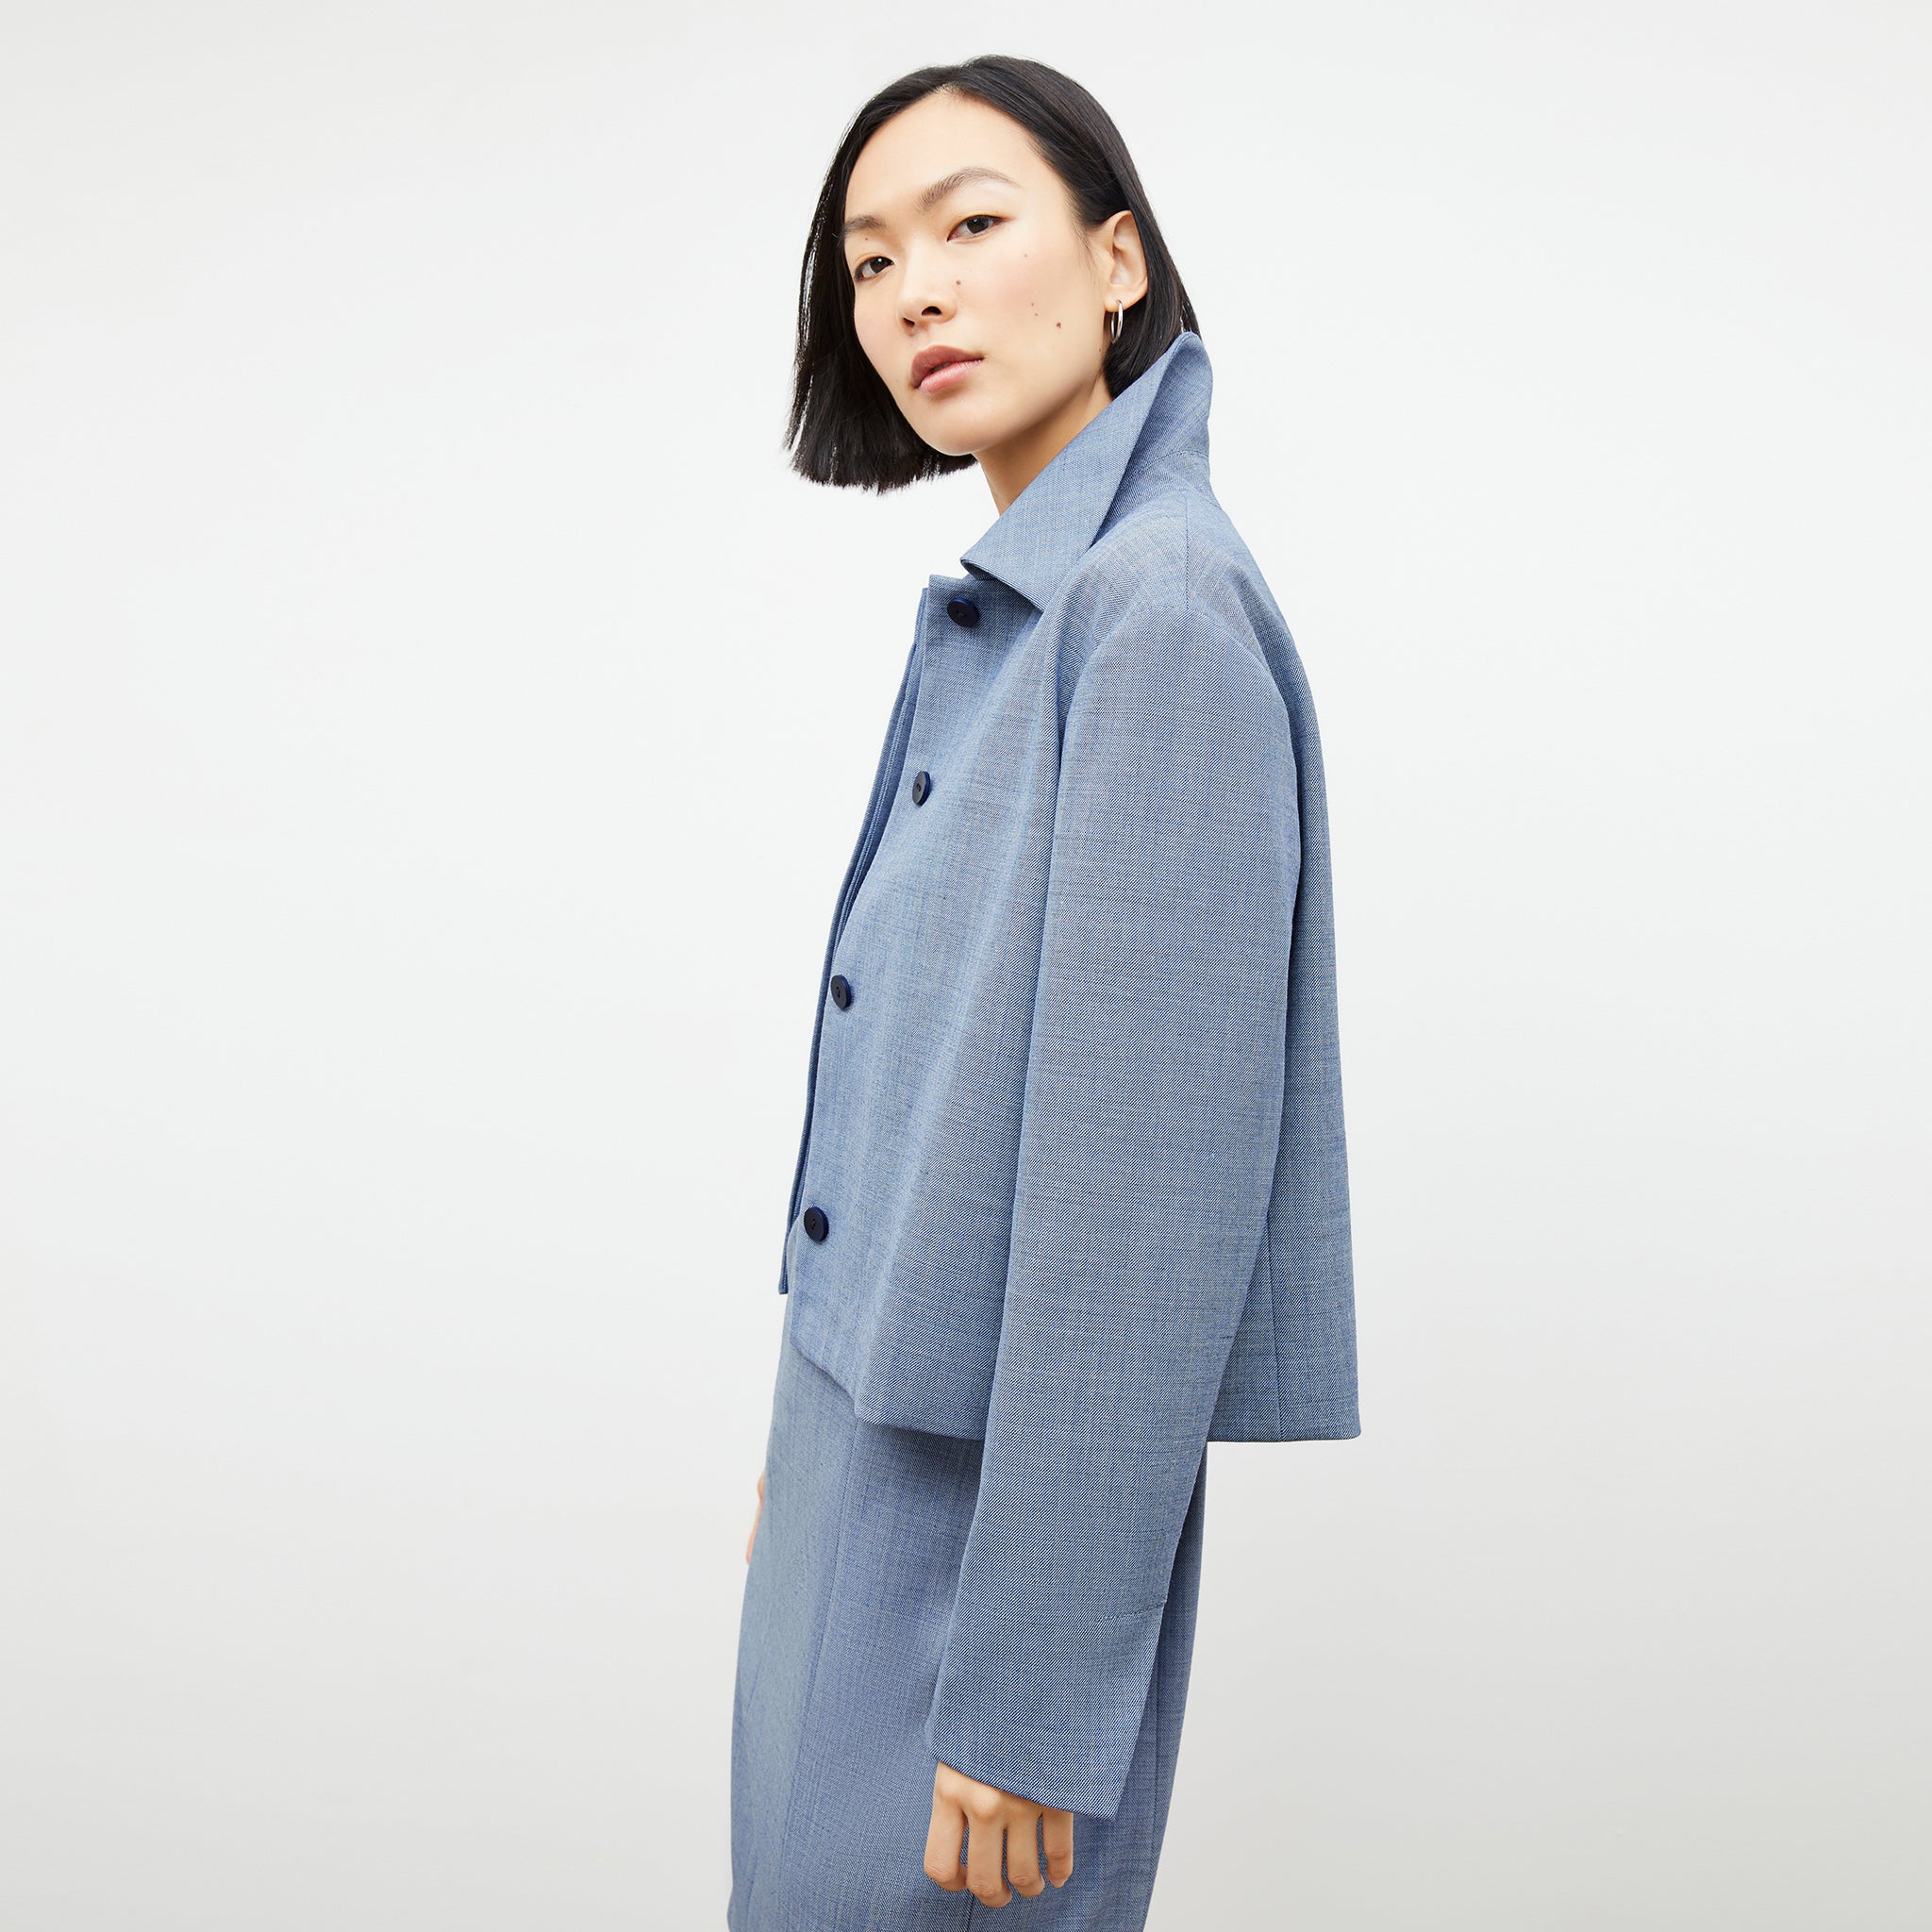 Side image of a woman wearing the nicky jacket in indigo and white